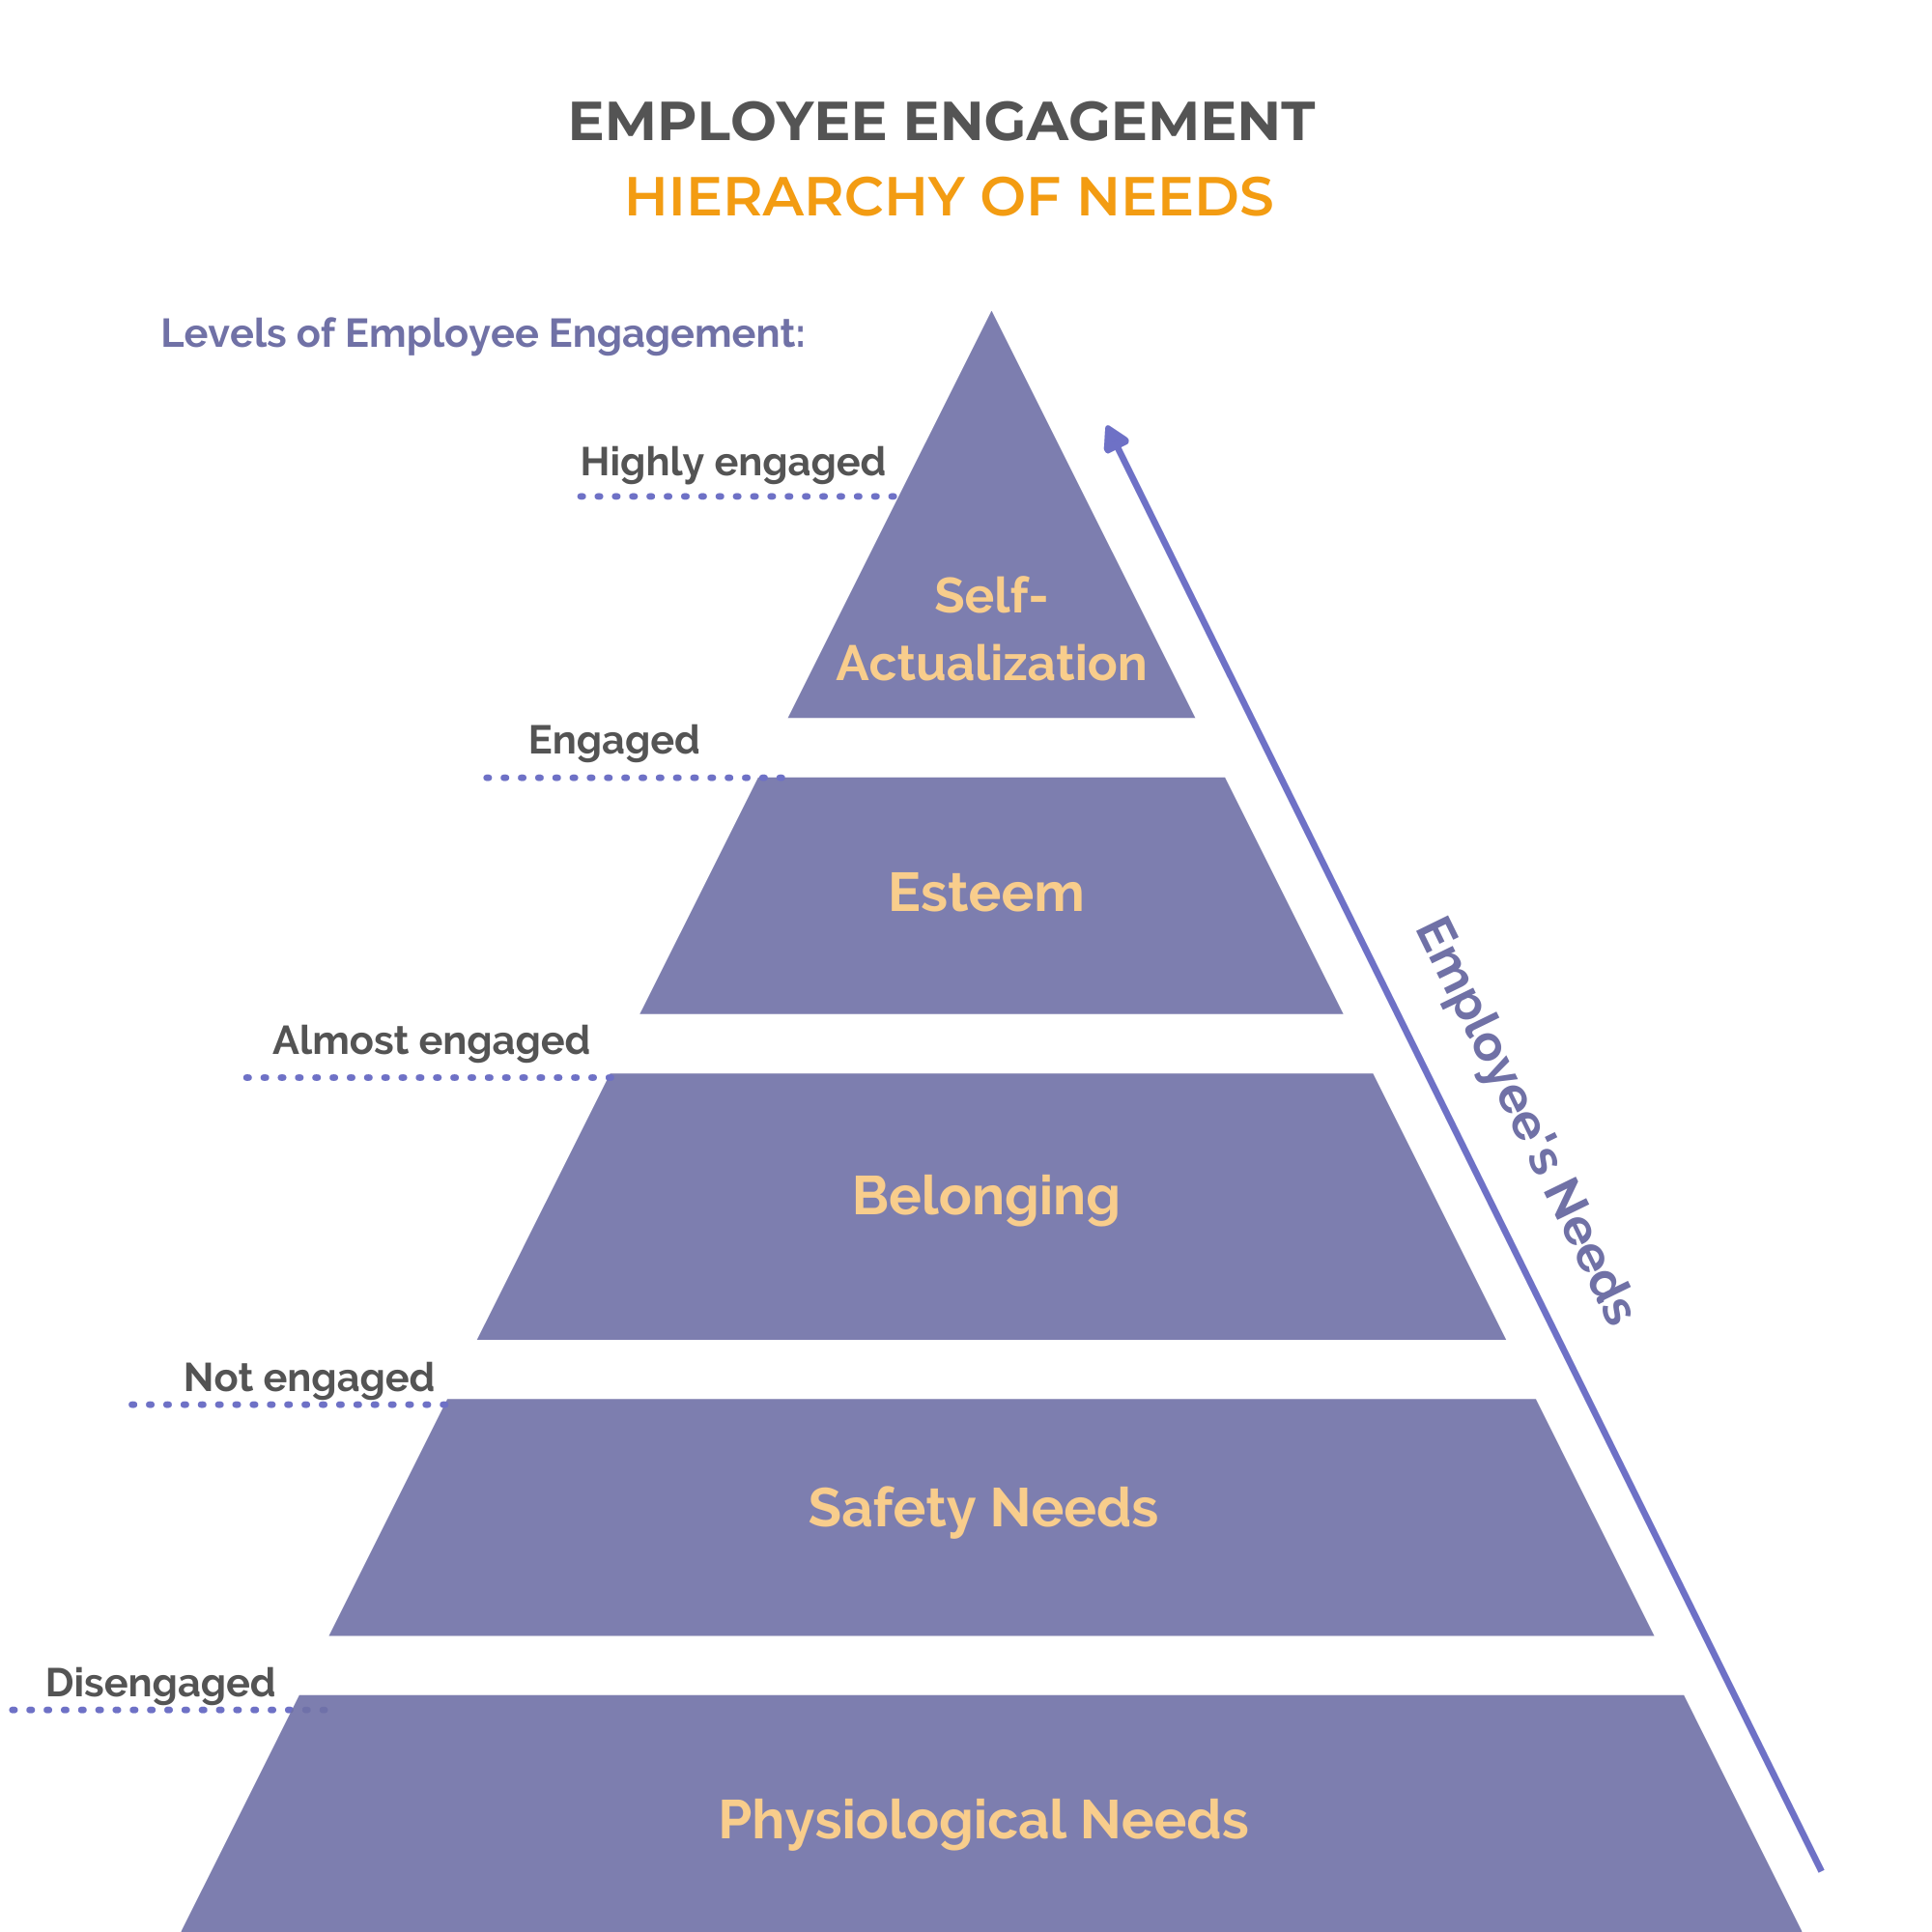 Employee Hierarchy of Needs 2-1